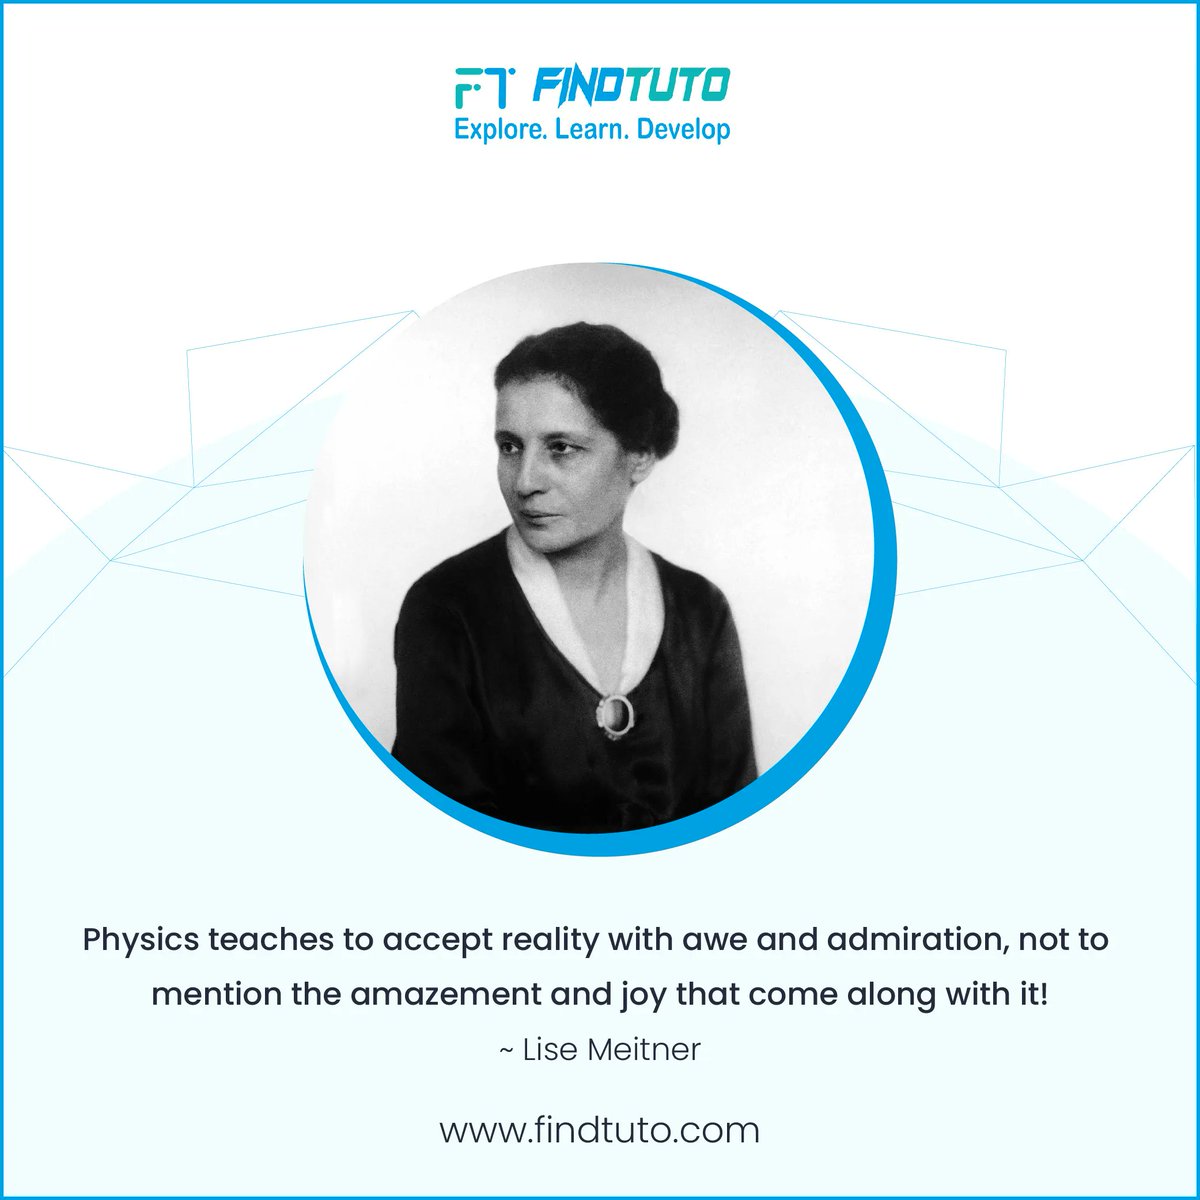 Quote of the Day!
Physics teaches us to accept reality with awe and admiration, not to mention the amazement and joy that come along with it!
~ Lise Meitner
#physics #expertquotes #lisemeitner #fridayquote